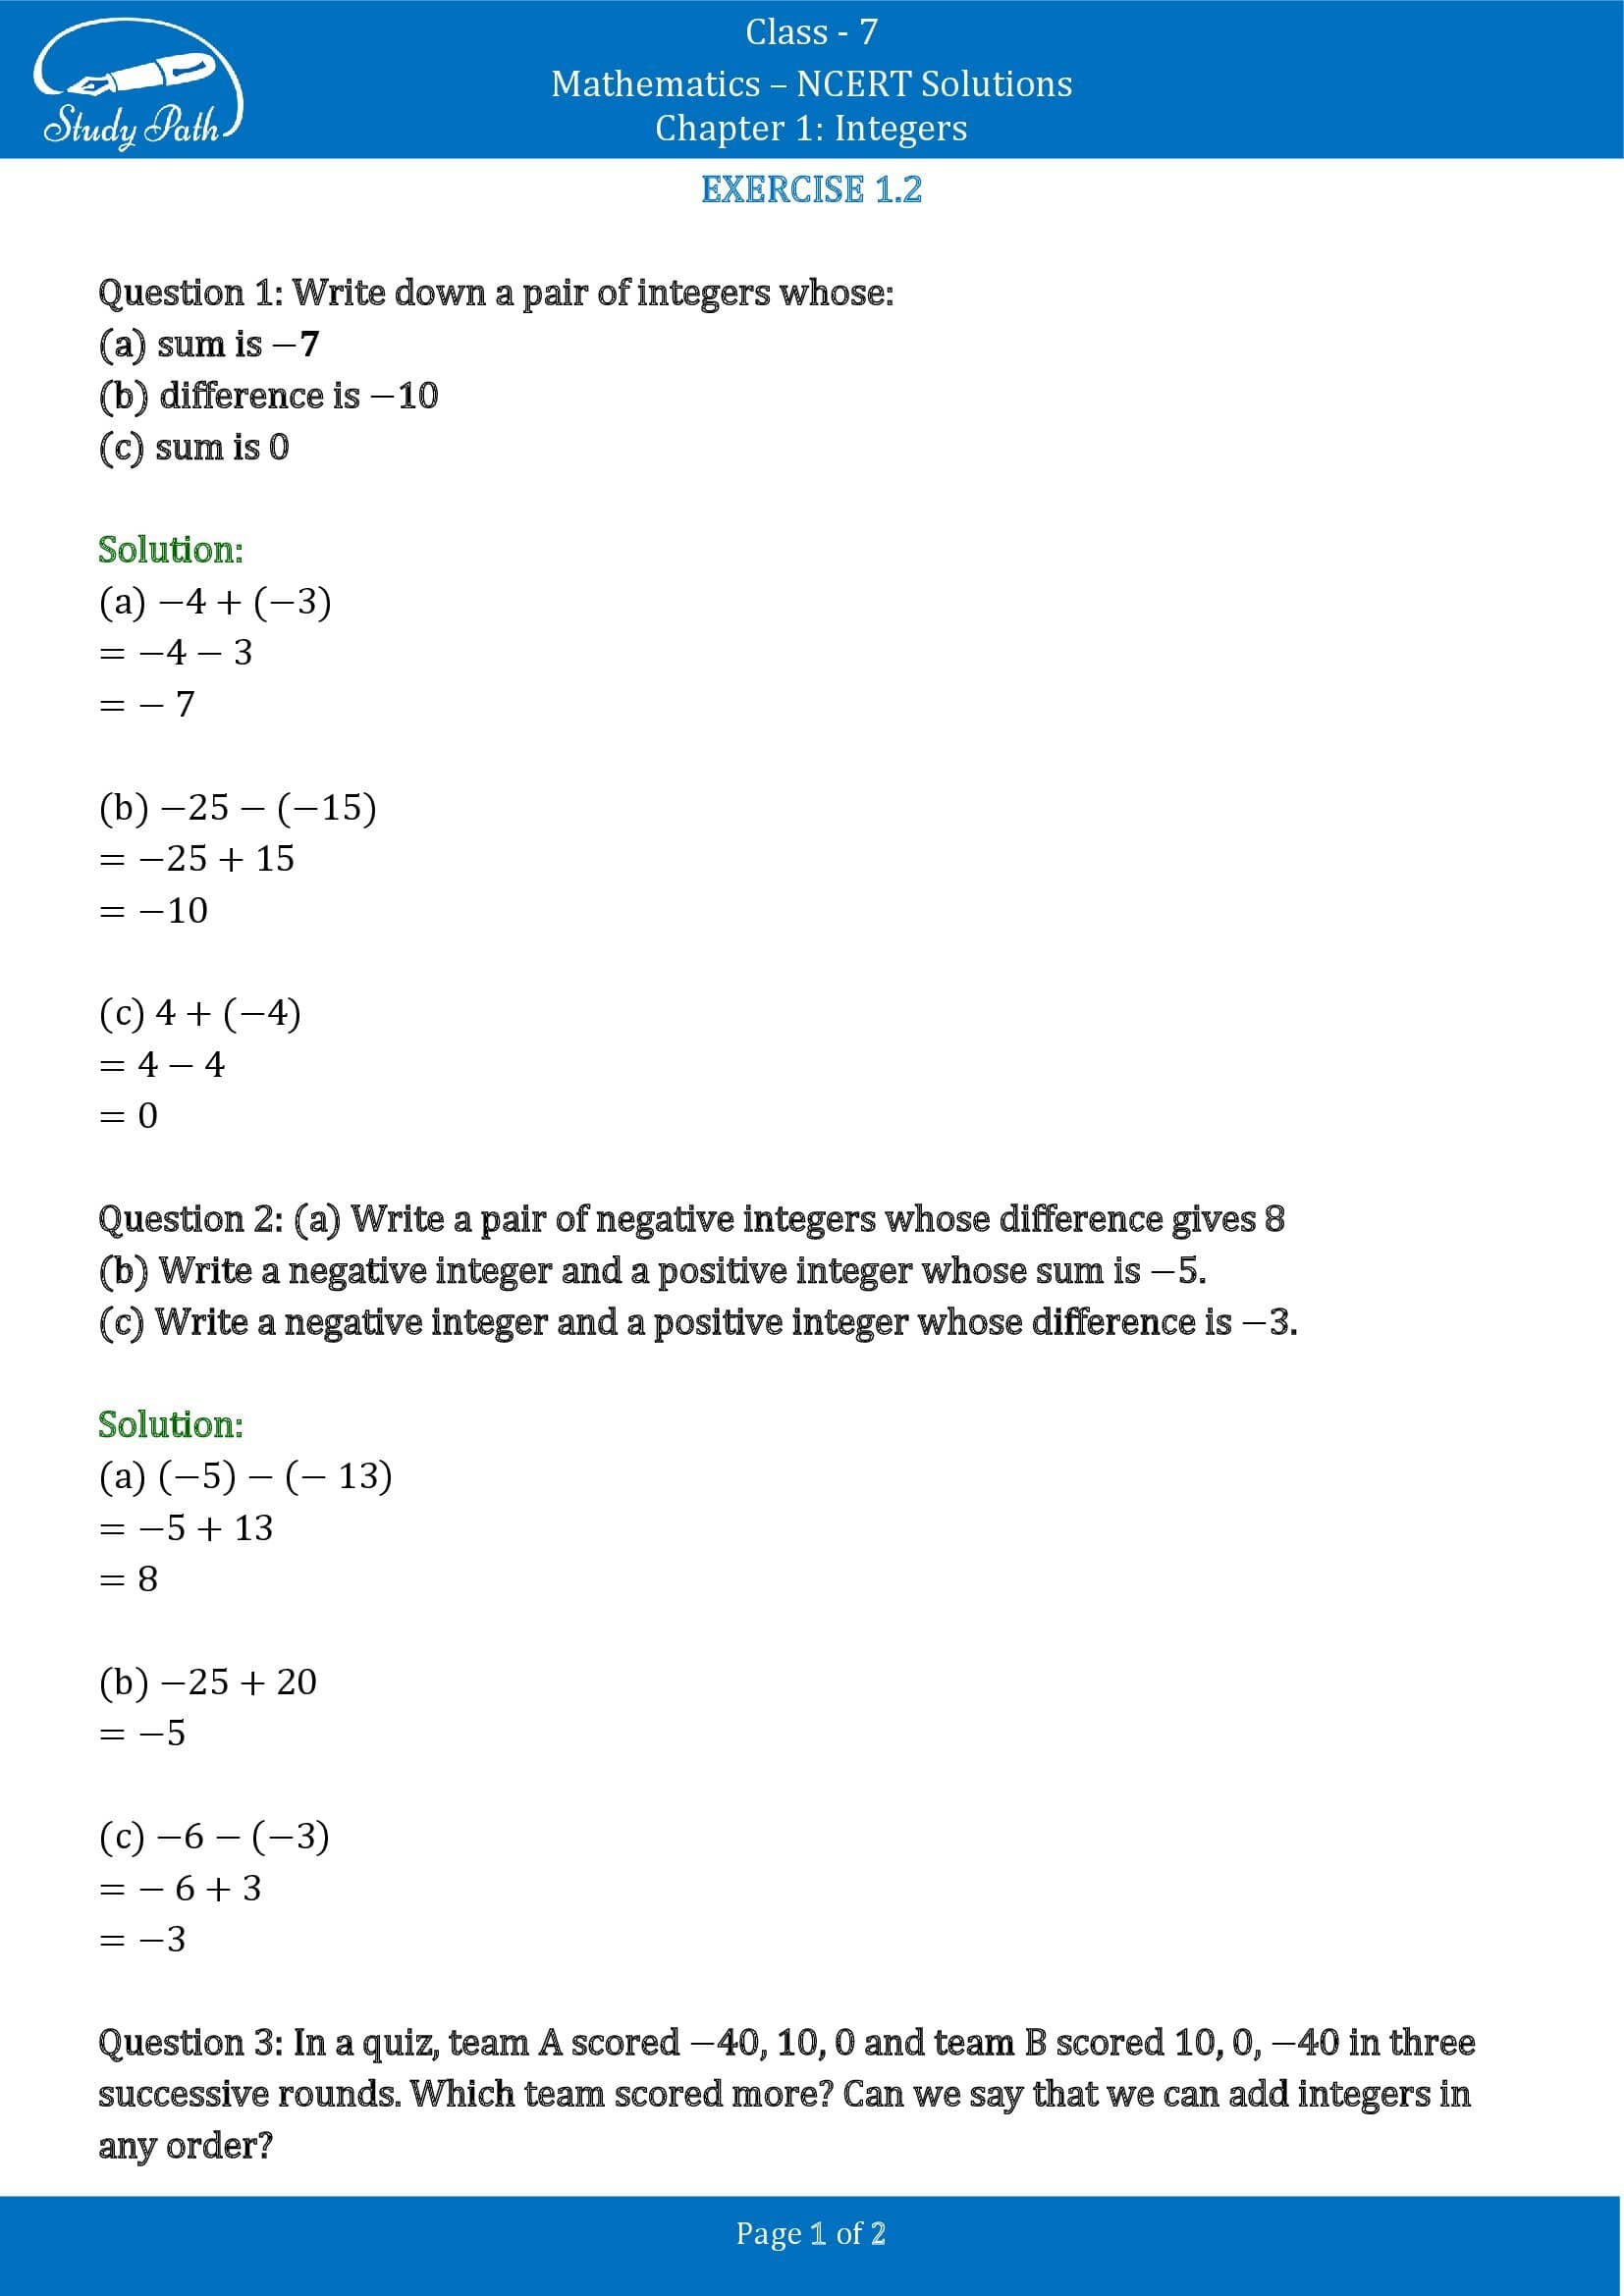 NCERT Solutions for Class 7 Maths Chapter 1 Integers Exercise 1.2 00001